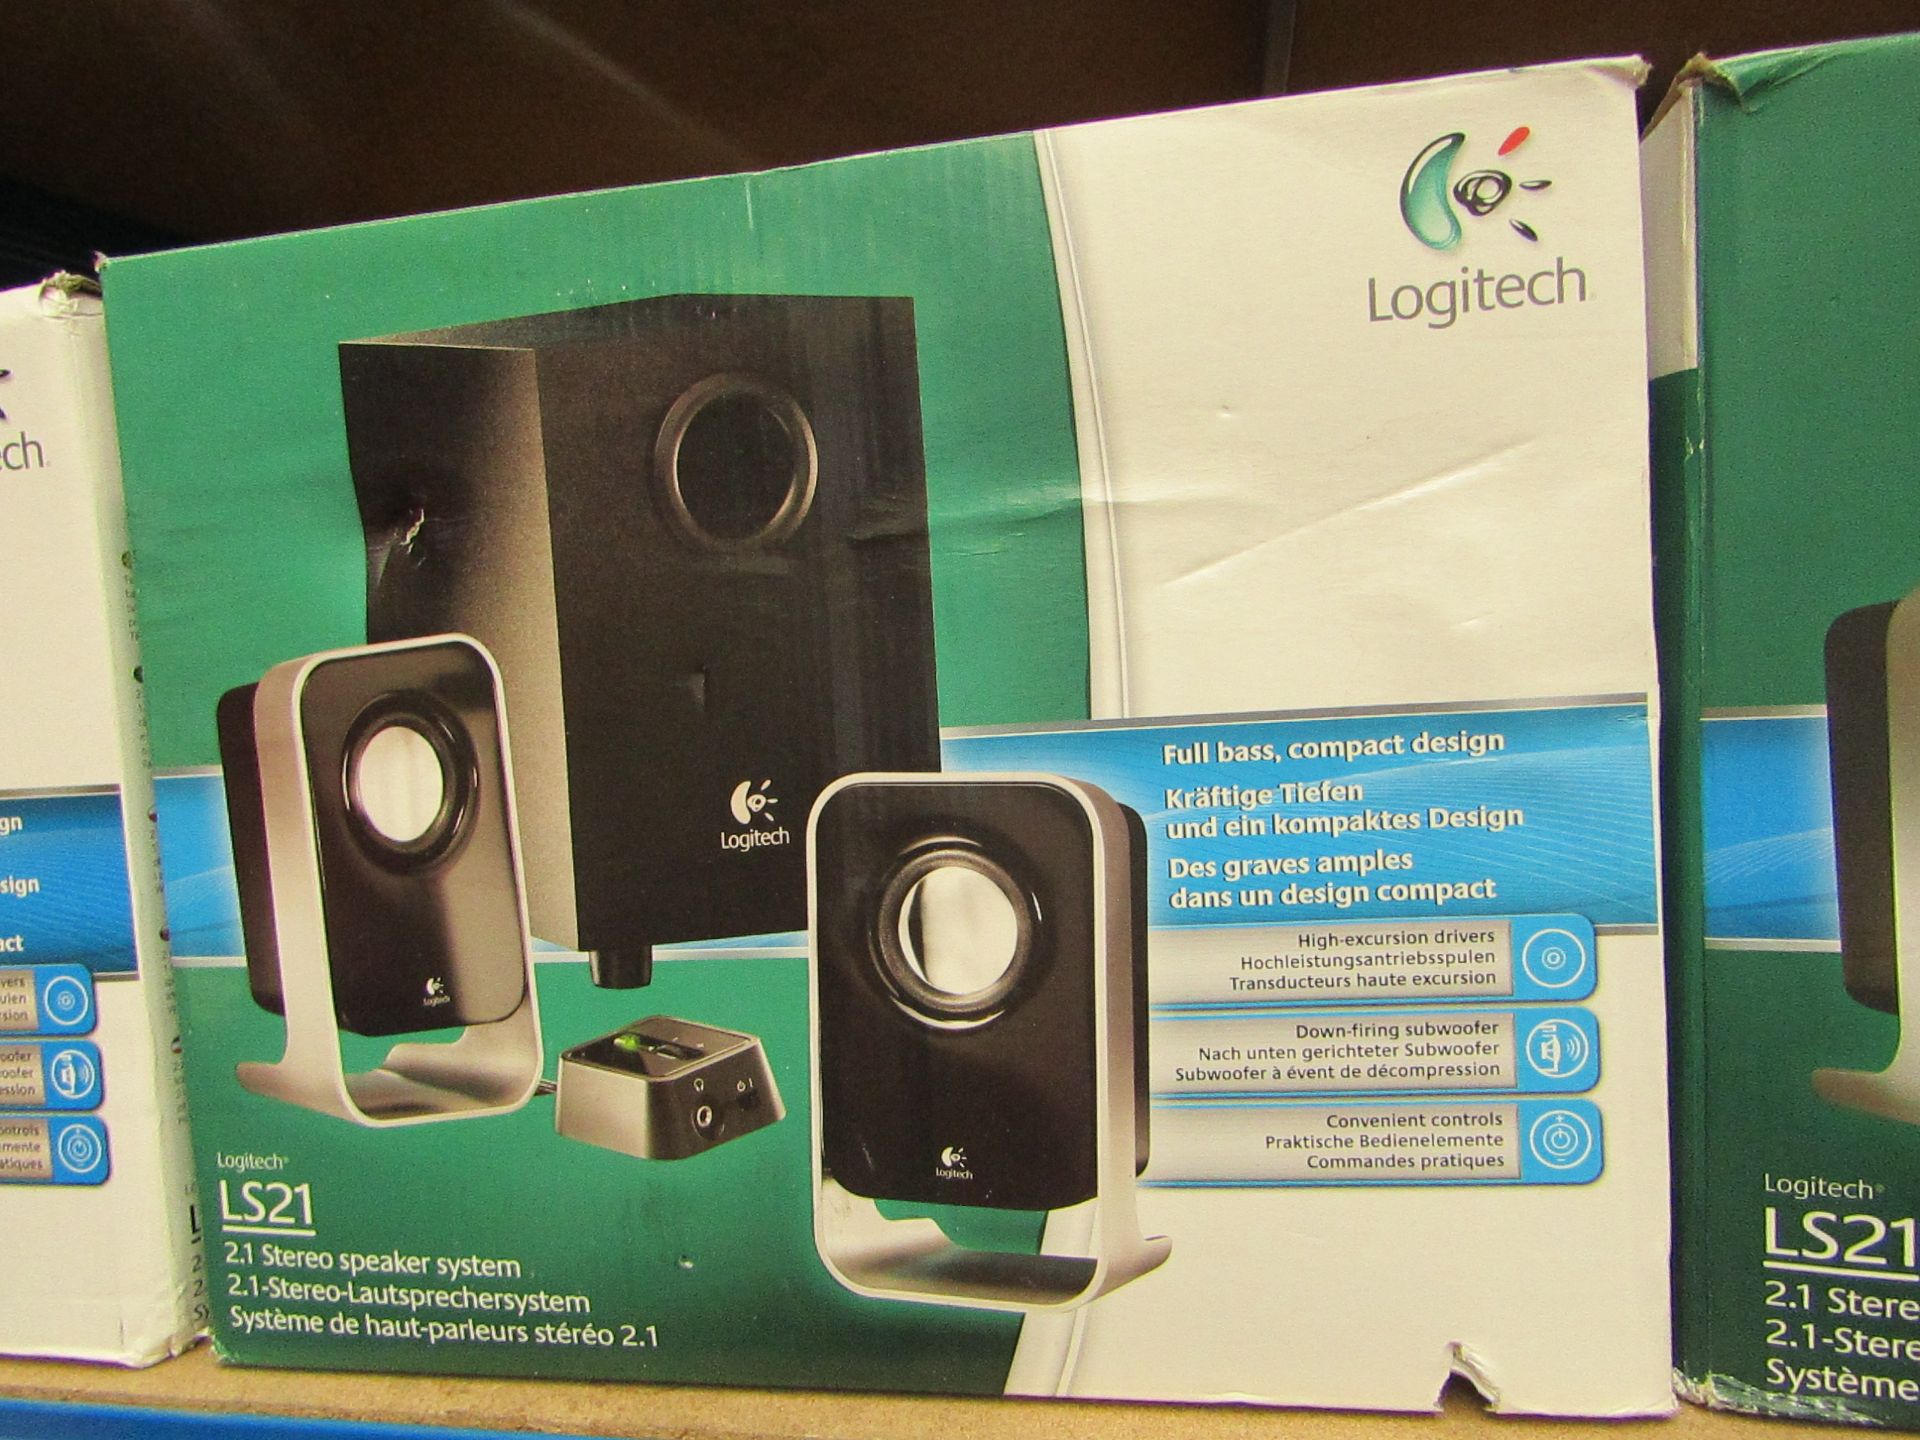 Logitech 2.1 Stereo Speaker System.Boxed but untested